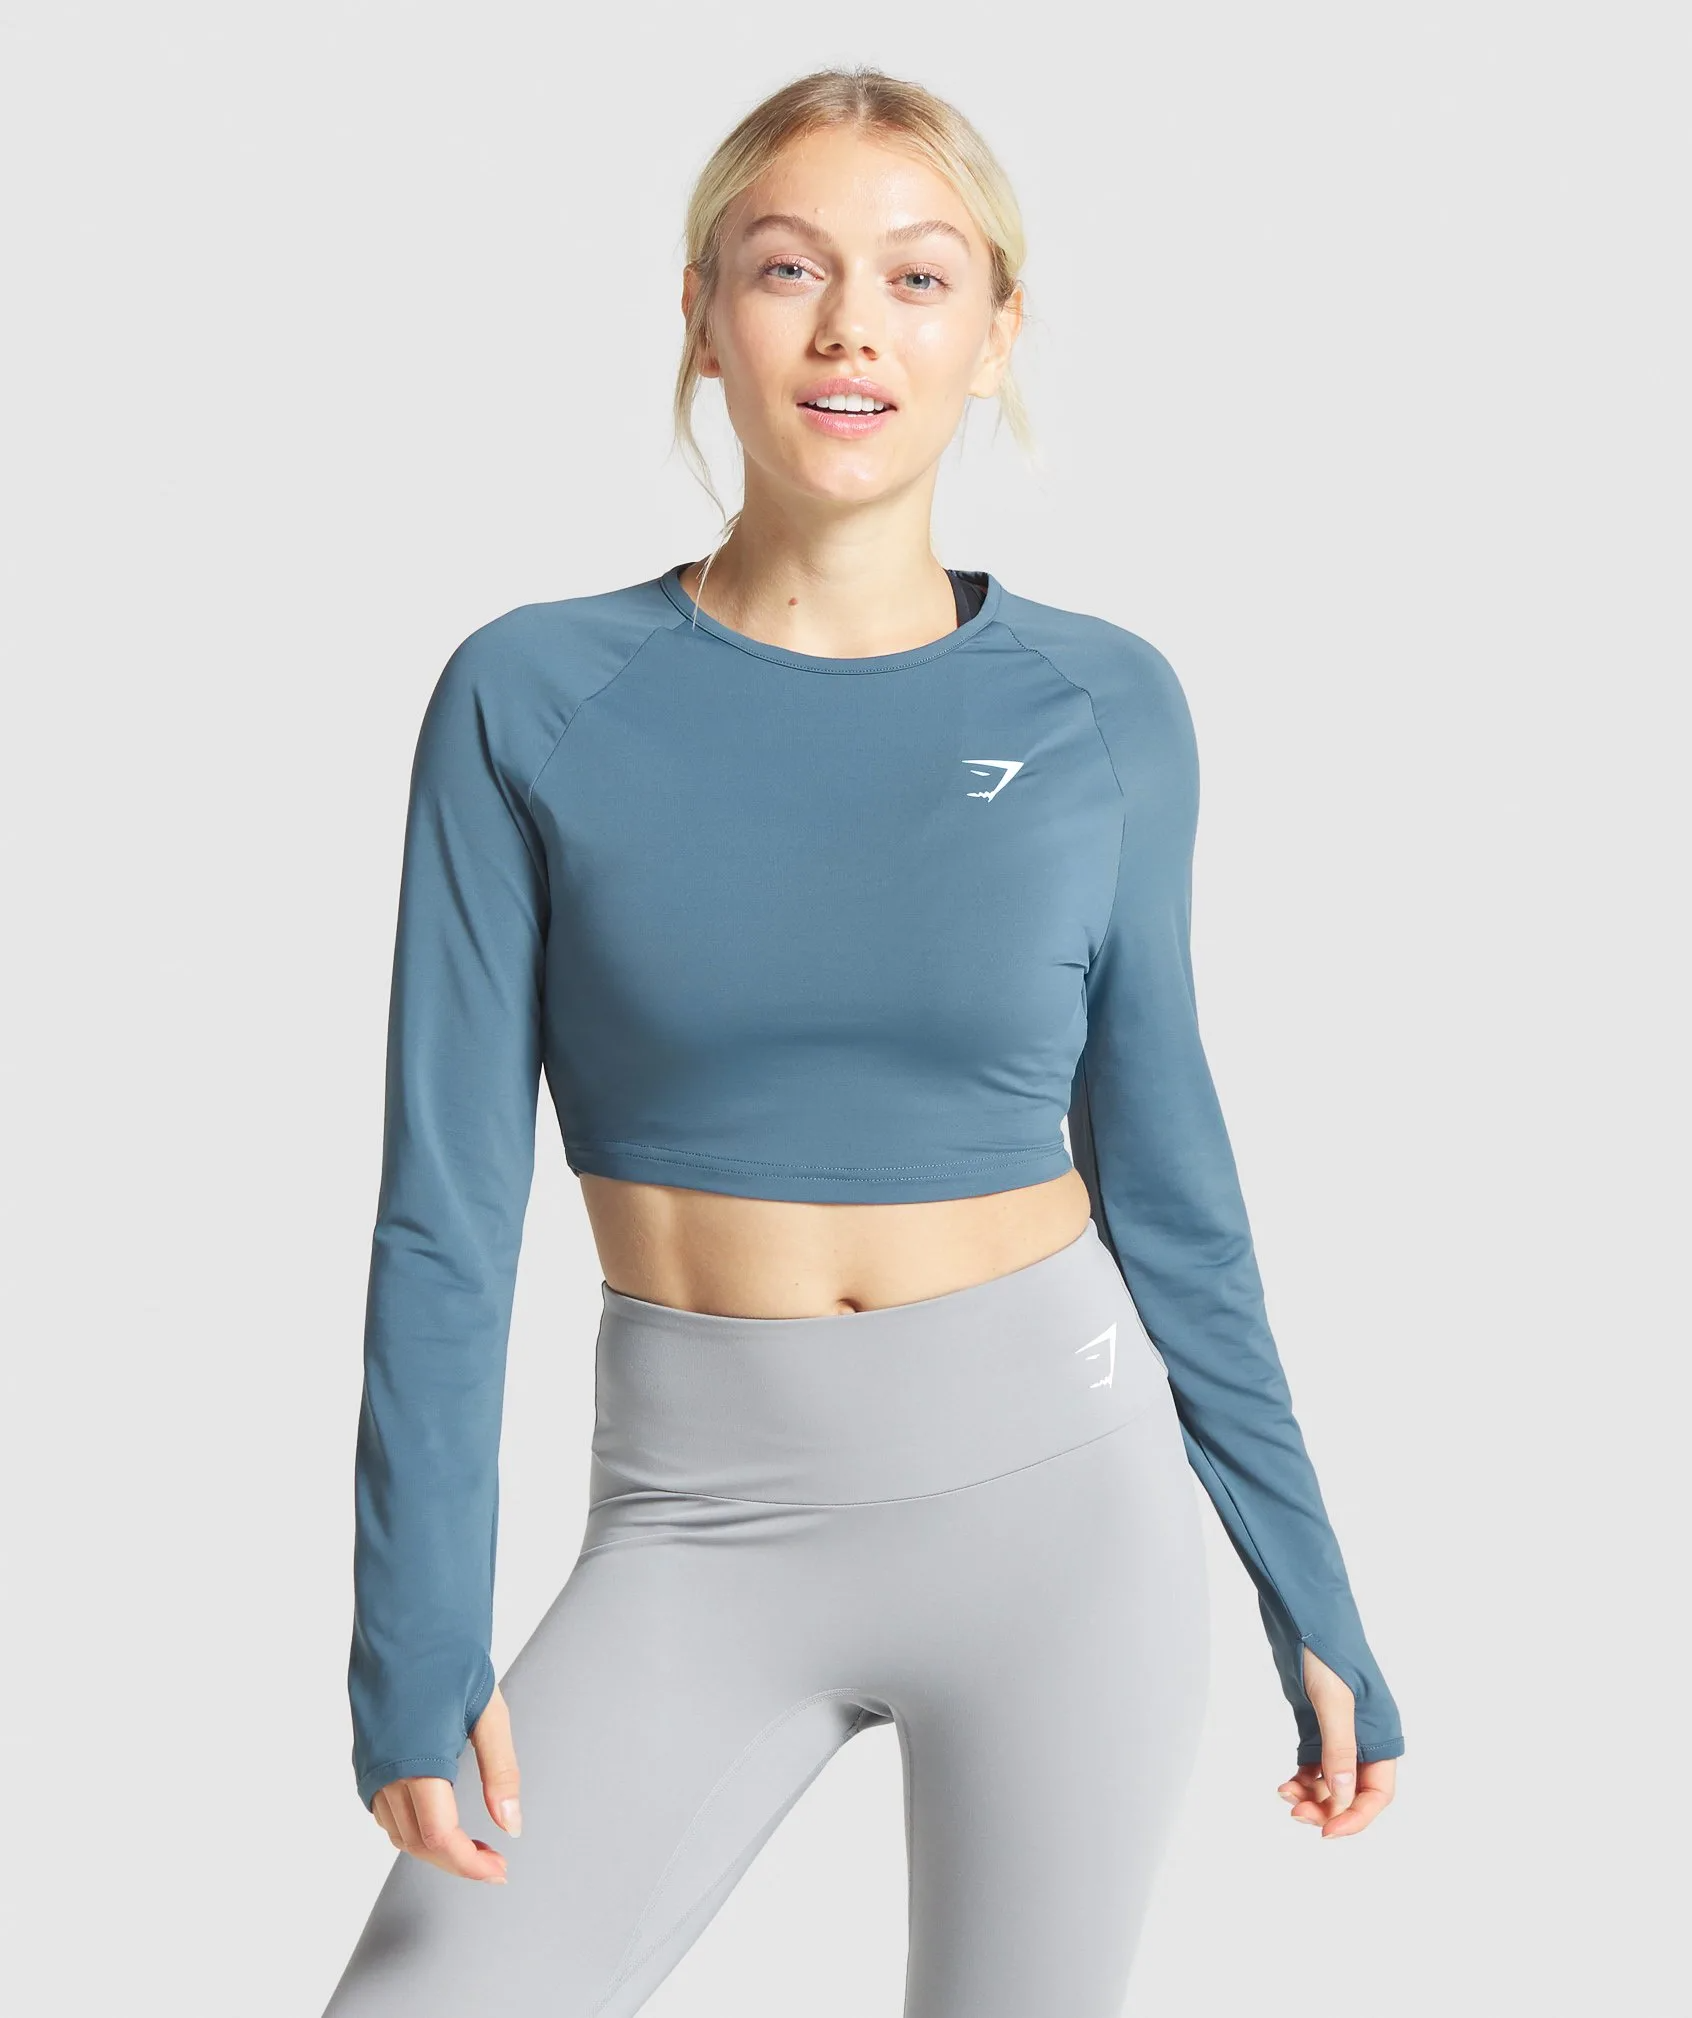 Best Long Sleeve Workout Shirts For Women To Buy ASAP